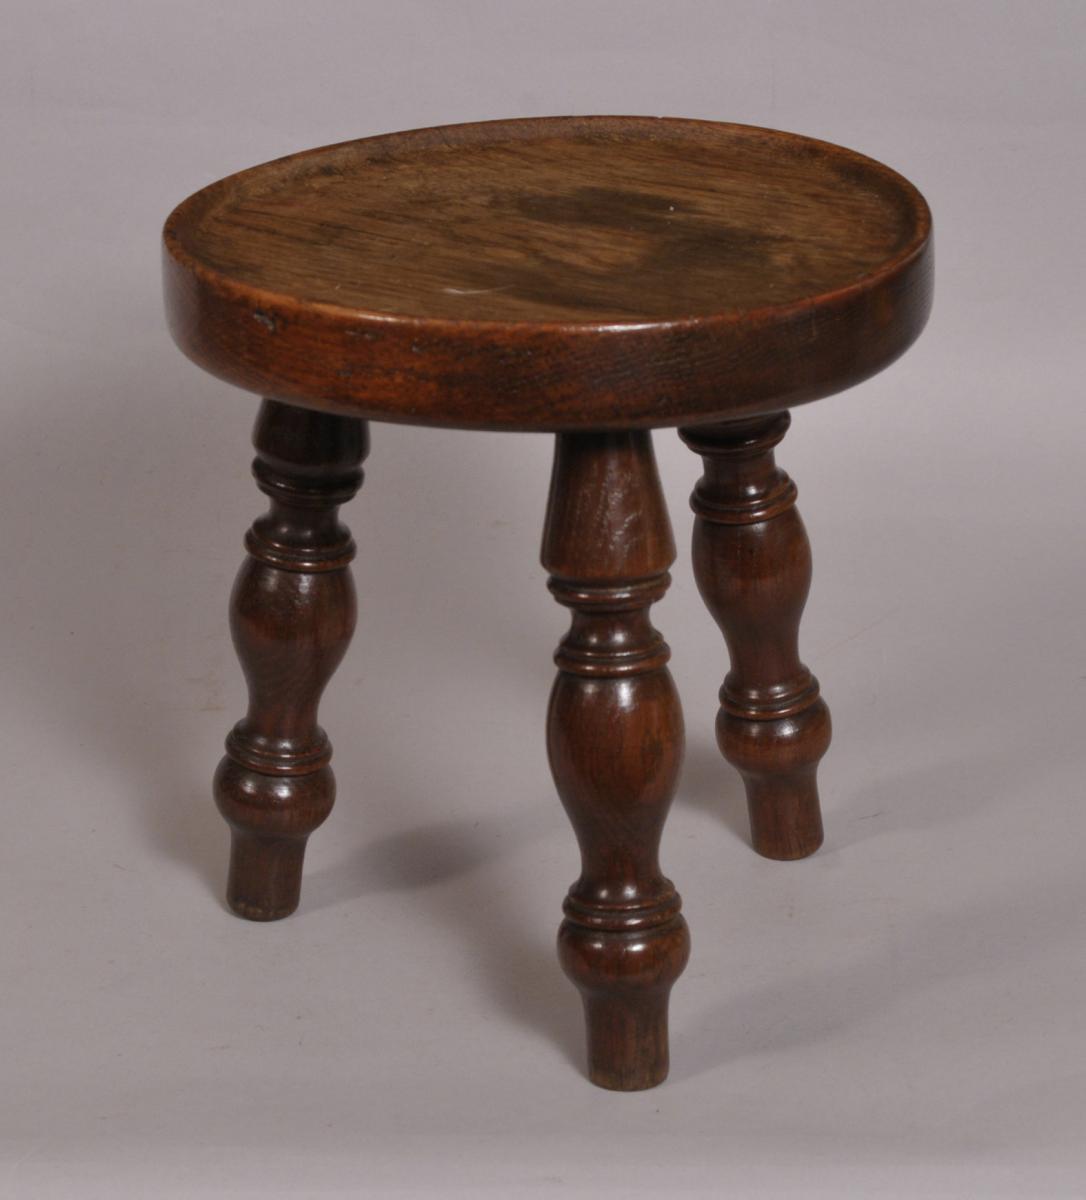 S/3757 Antique 19th Century Oak Dished Top Stool